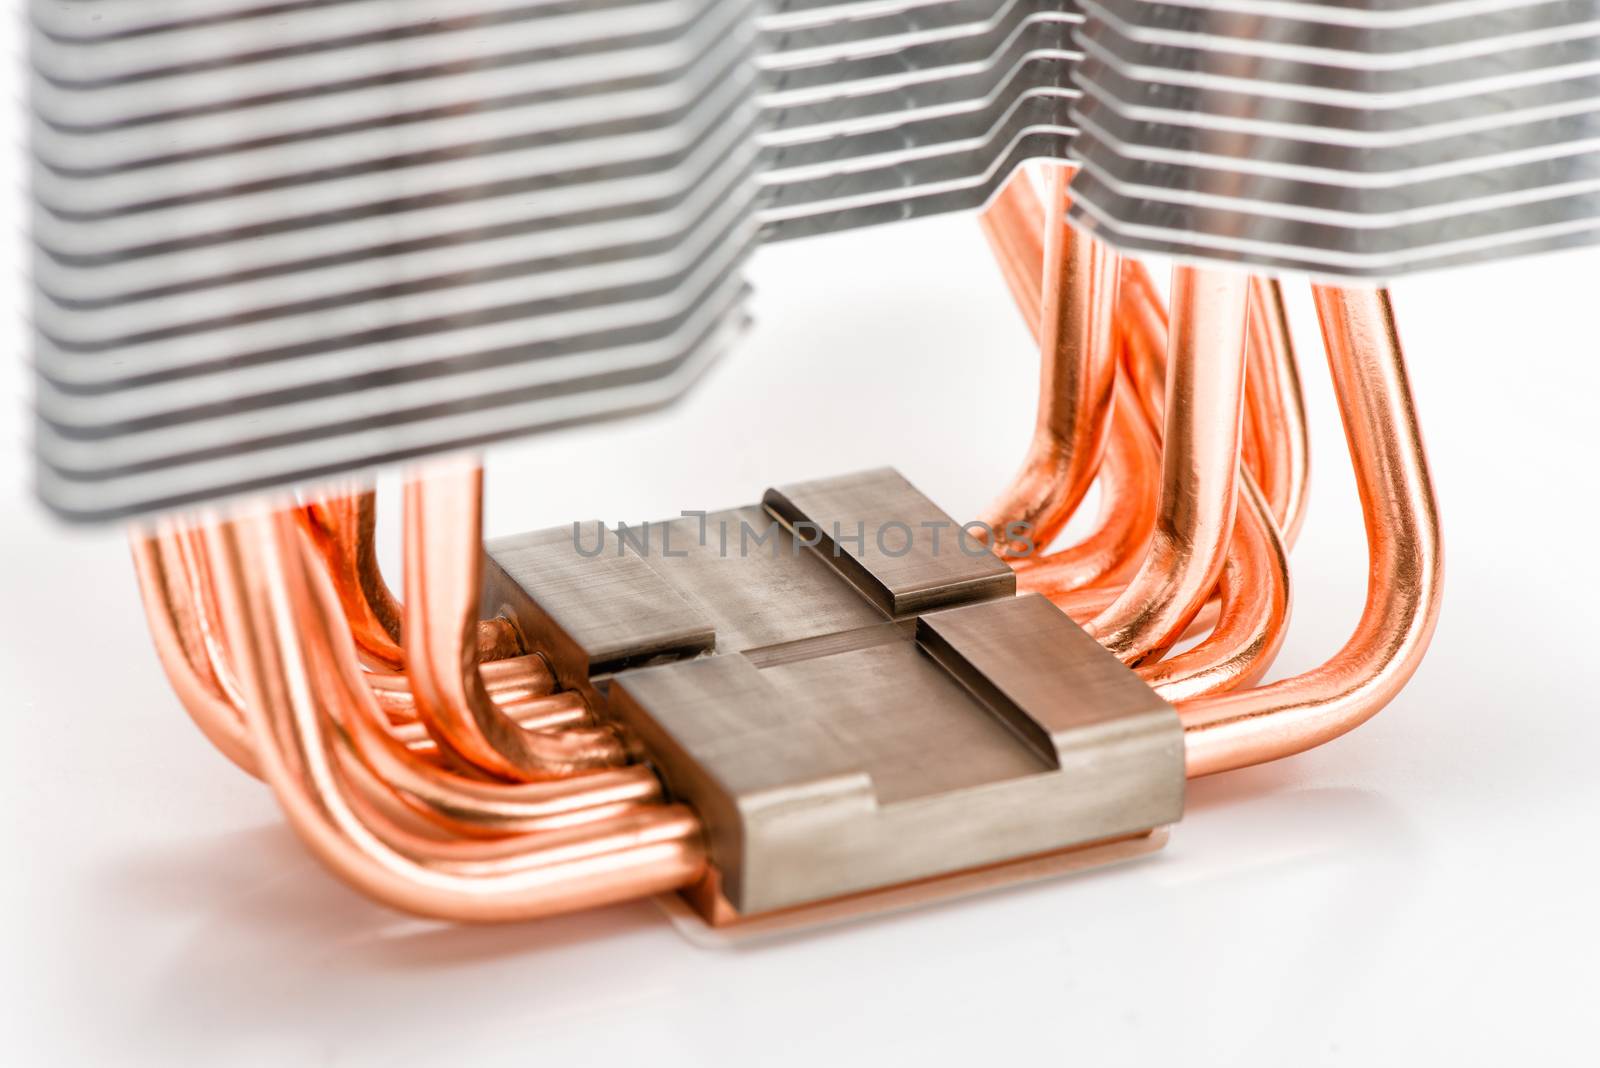 The base of the CPU cooler and the heat pipes by Draw05